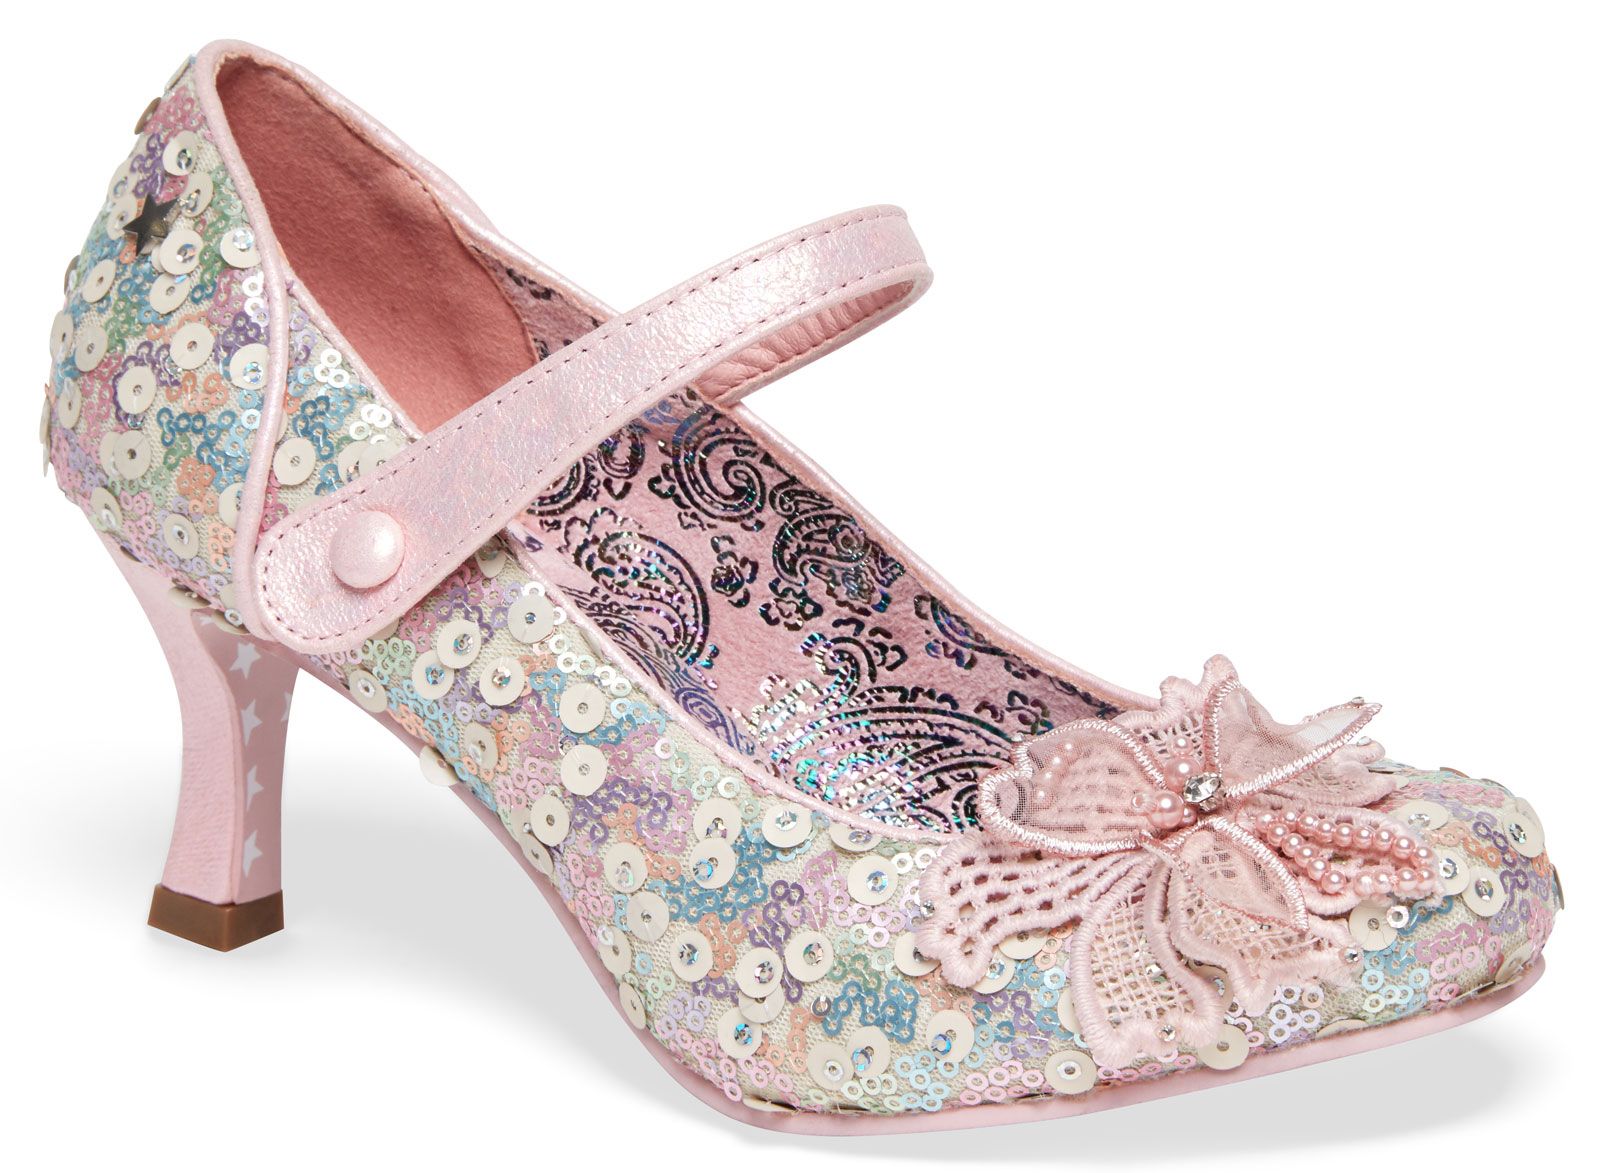 Joe Browns Couture Katherina Womens Occasion Shoes Pastels/Multi